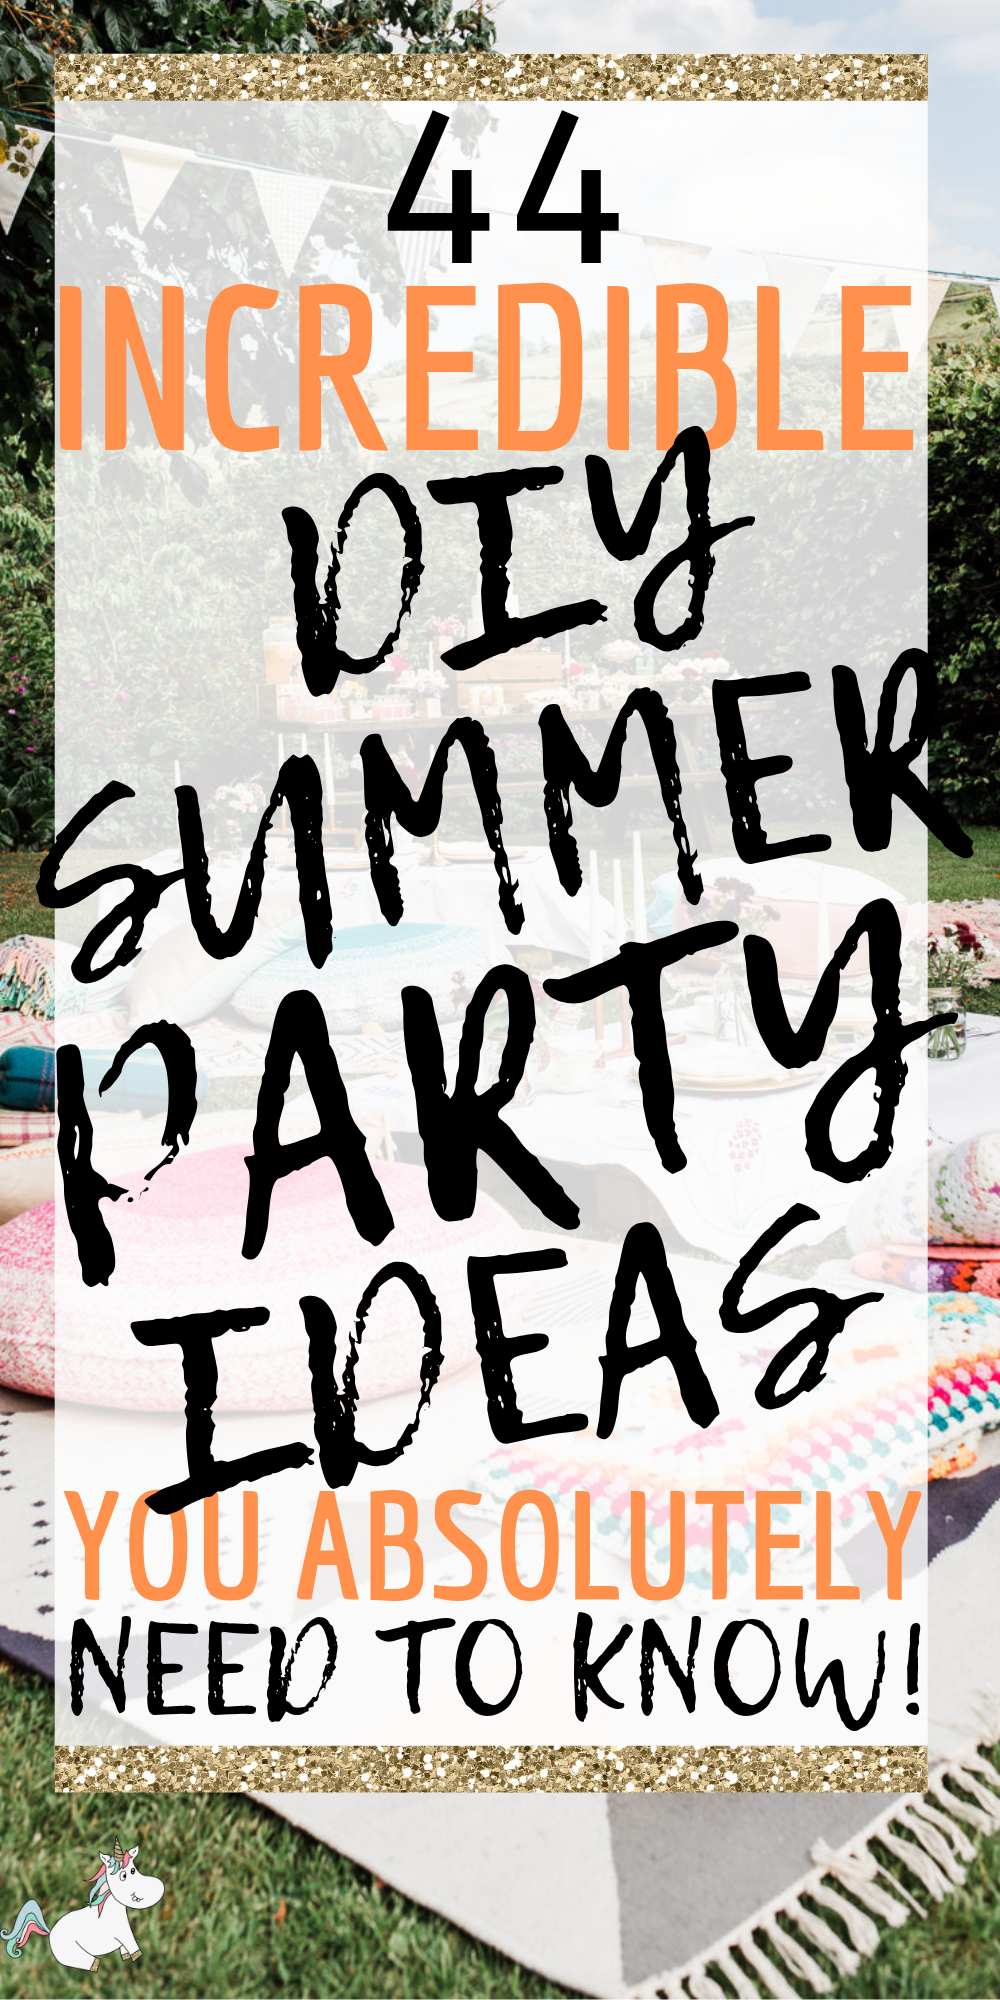 44 Amazing DIY Summer Party Ideas you Need To Know! These summer party ideas will ensure your outdoor party is unforgettable! #summerpartyideas #summerparty #outdoorparty #party #partyideas #bbqpartyideas #themummyfront